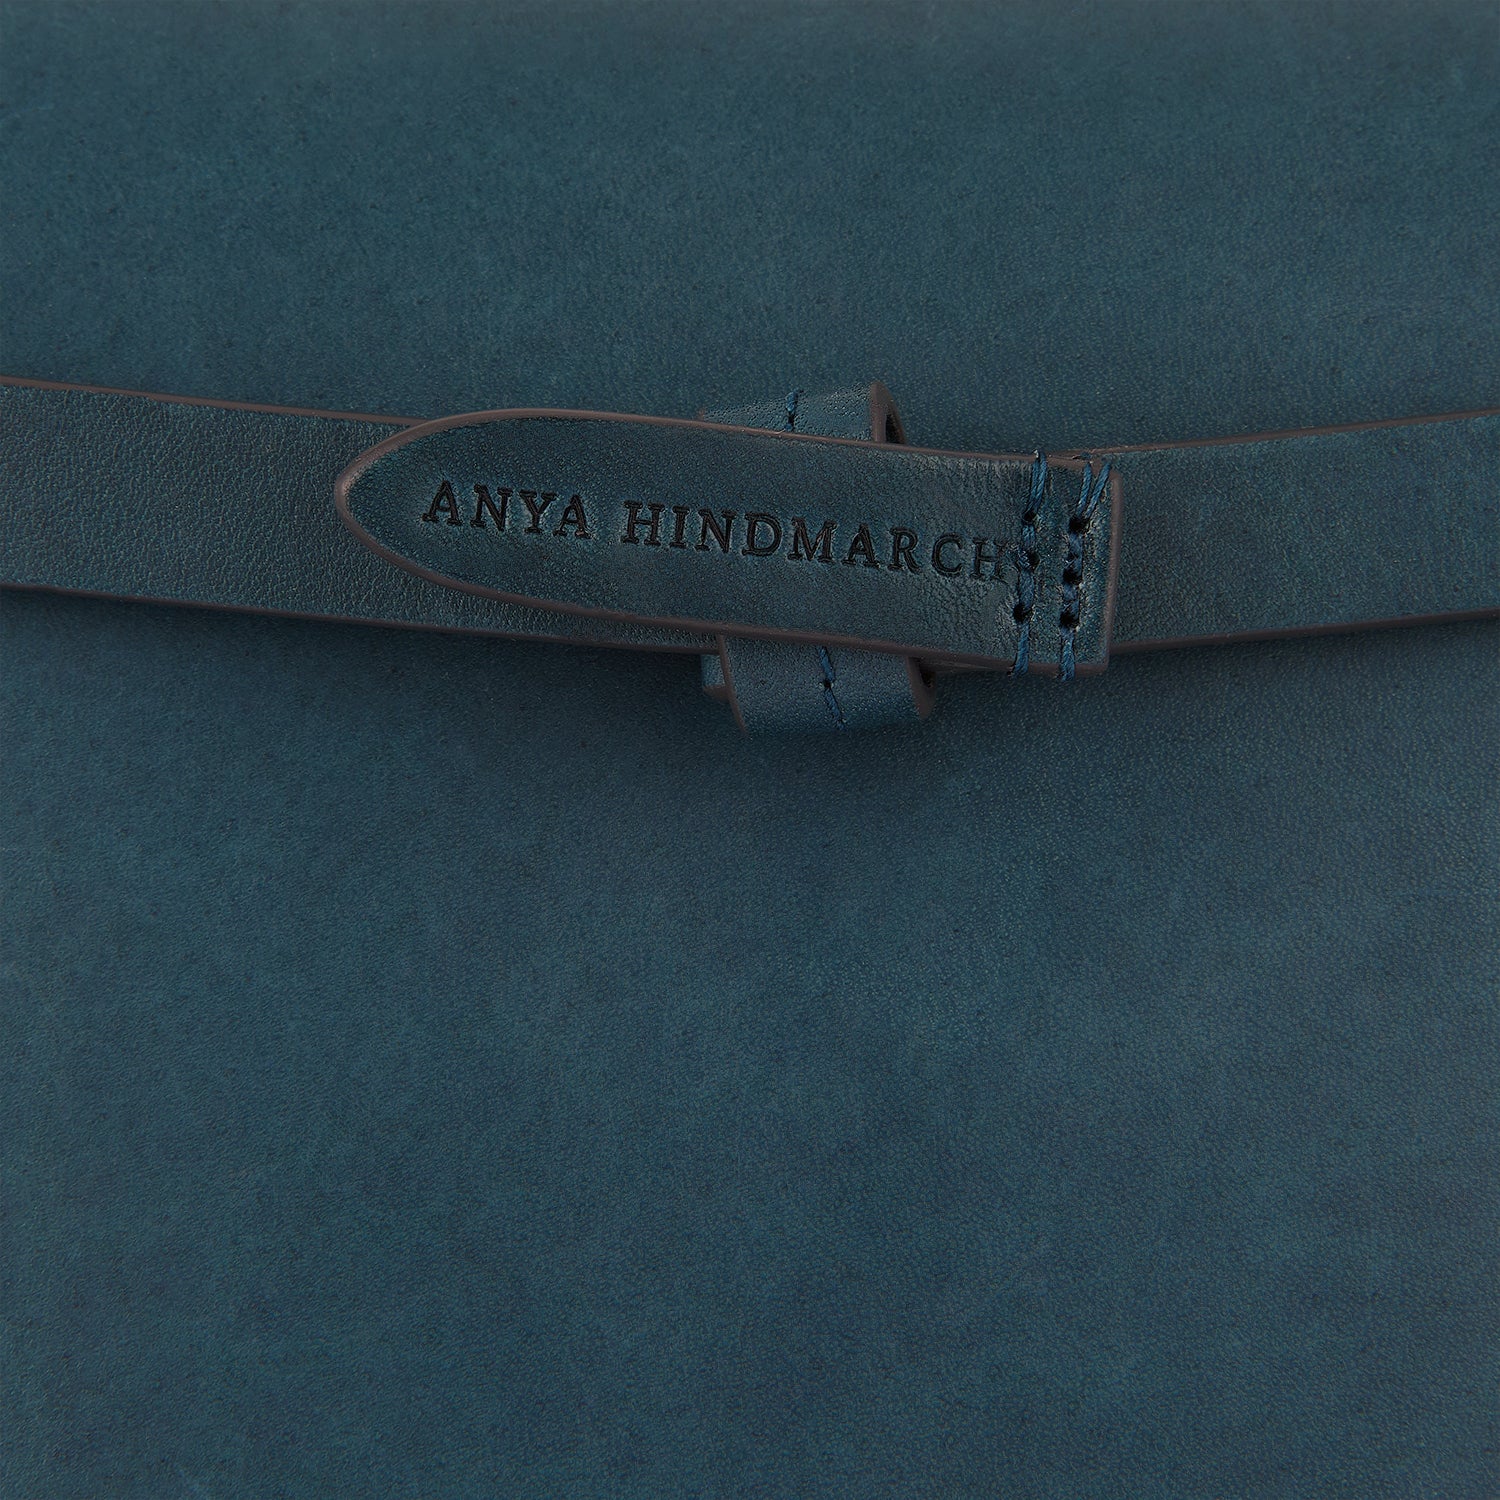 Return to Nature Cross-body -

                  
                    Compostable Leather in Dark Holly -
                  

                  Anya Hindmarch UK
